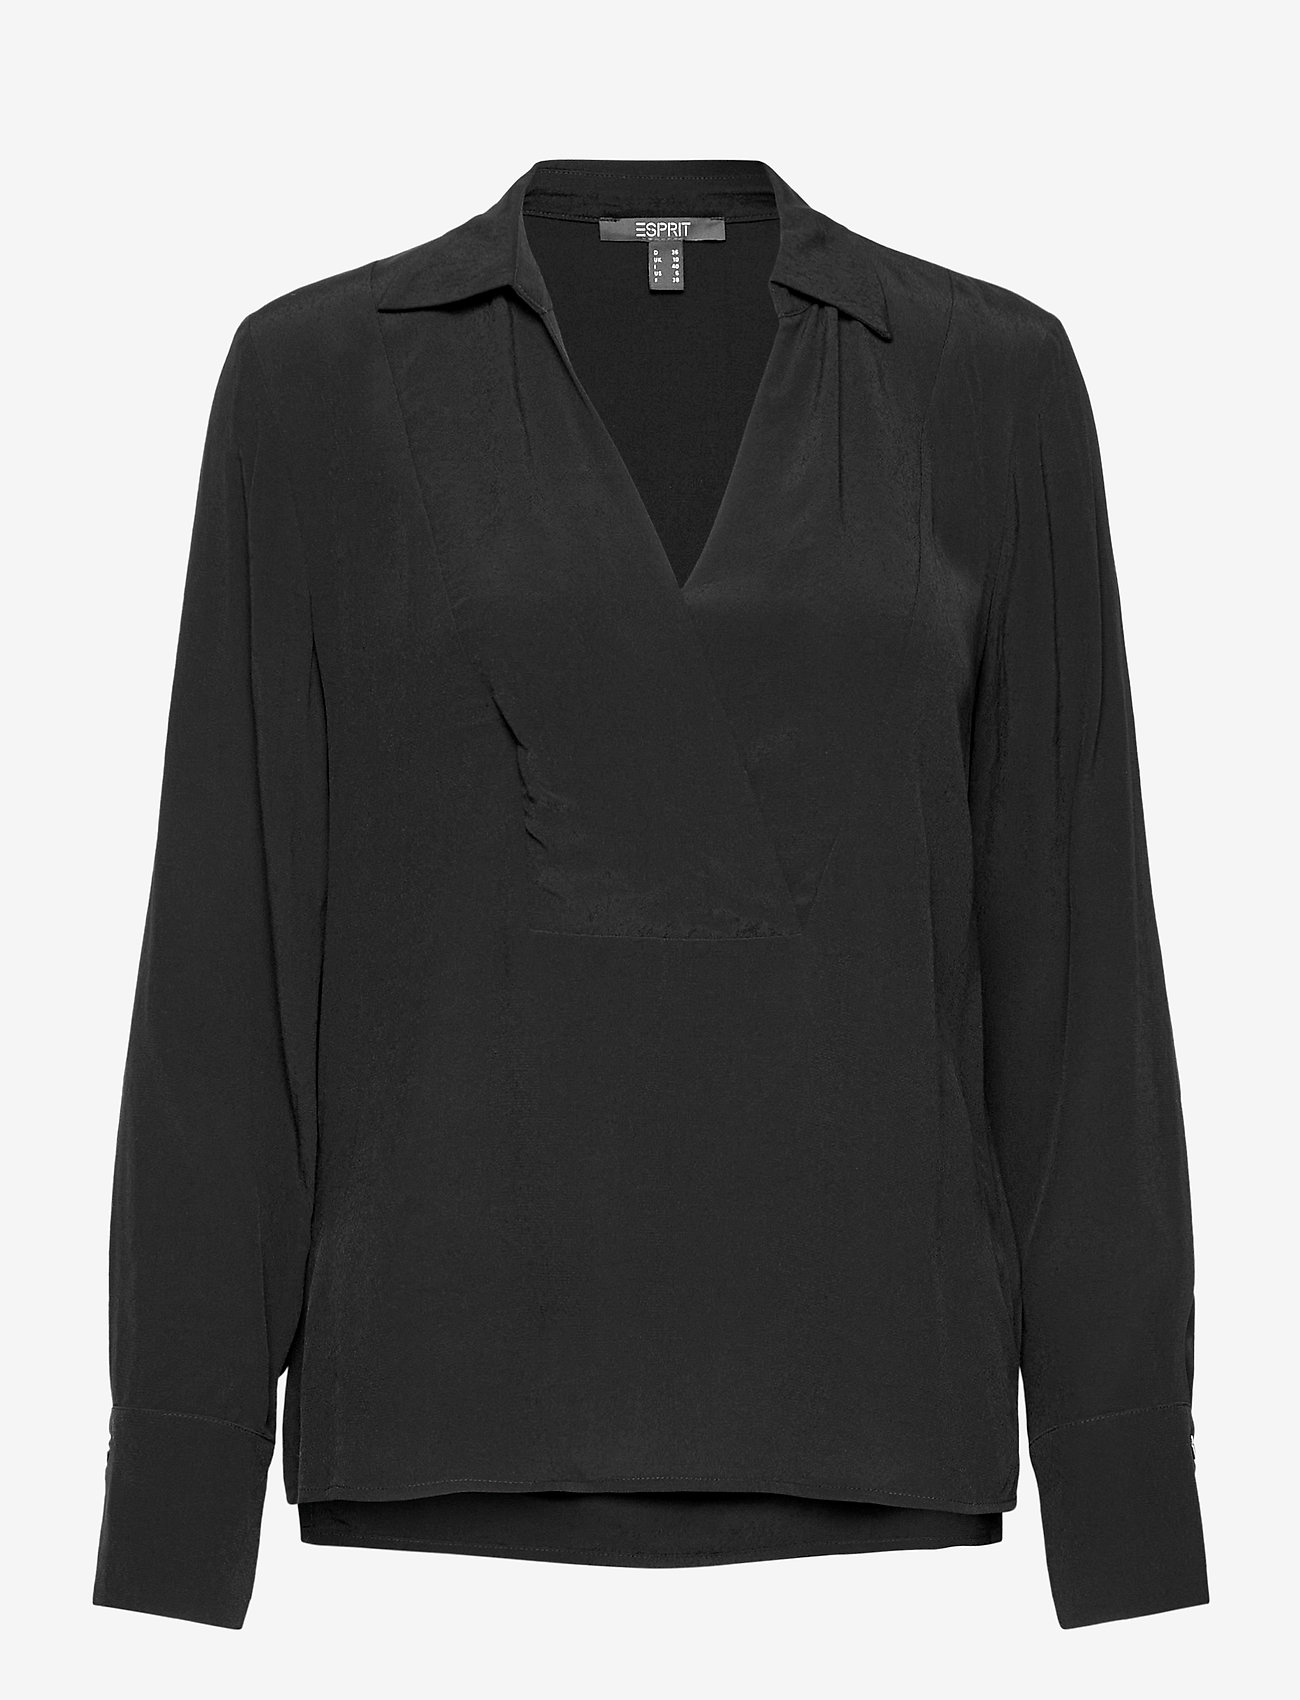 Esprit Collection - Women Blouses woven long sleeve - long-sleeved blouses - black - 0